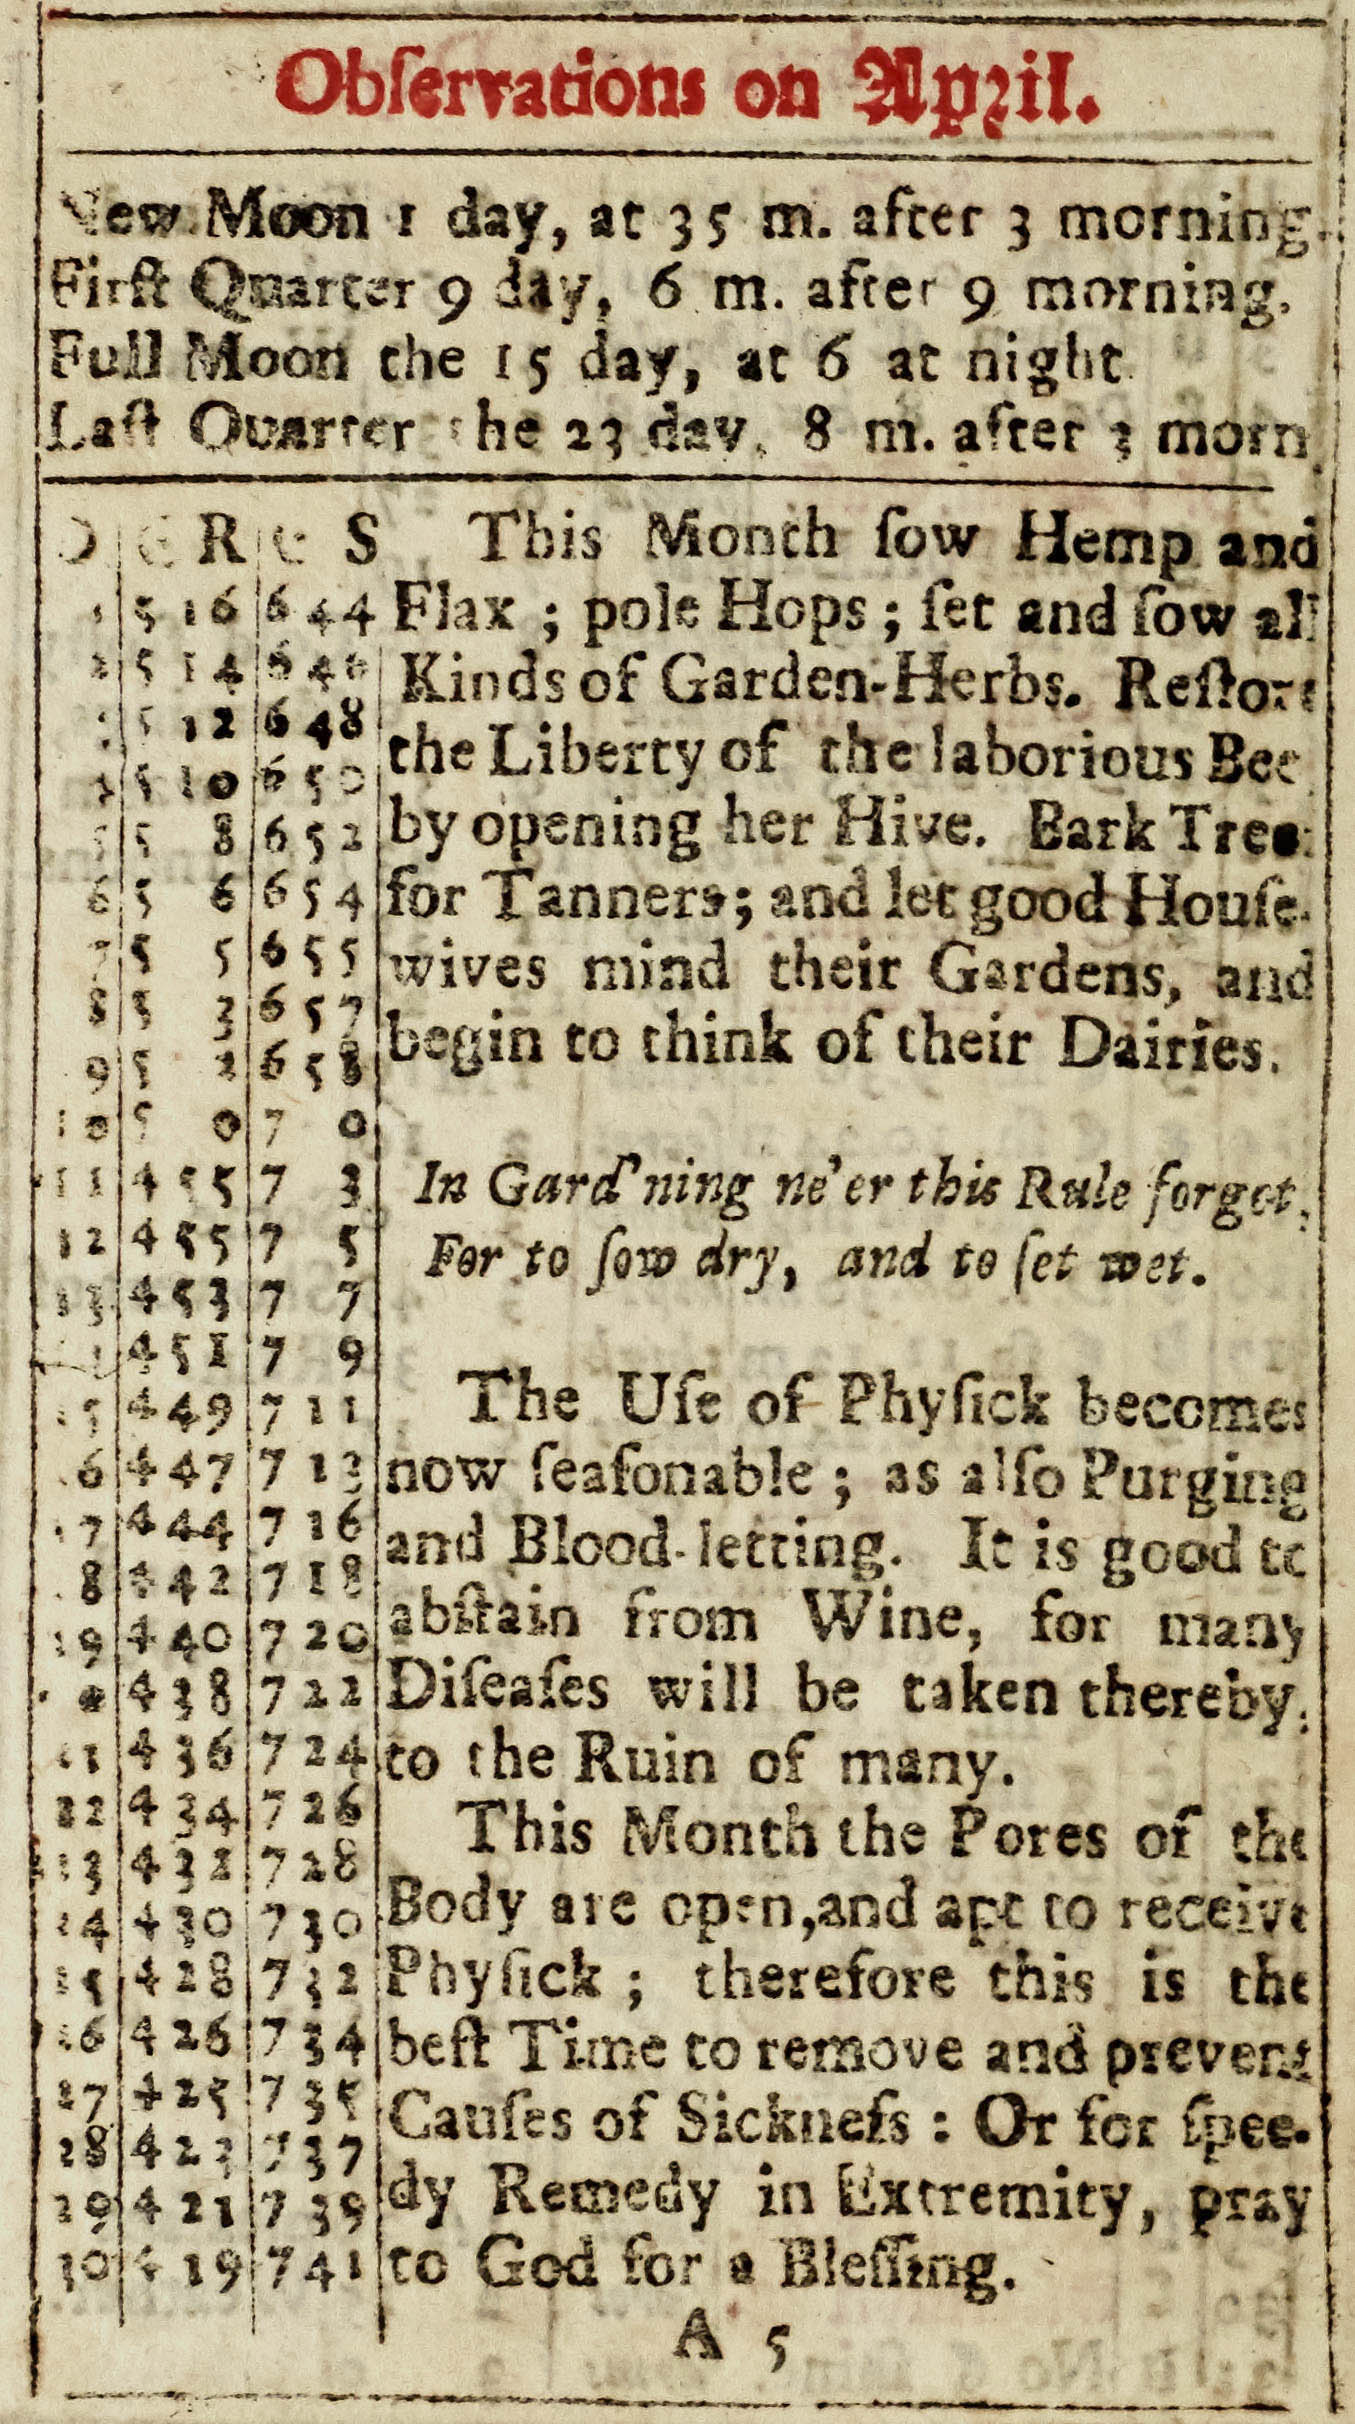 Observations for April, including gardening and beekeeping tips. Pages from the almanack in Thomas Cholmeley's diary of 1717, in the Cholmeley of Brandsby archive.